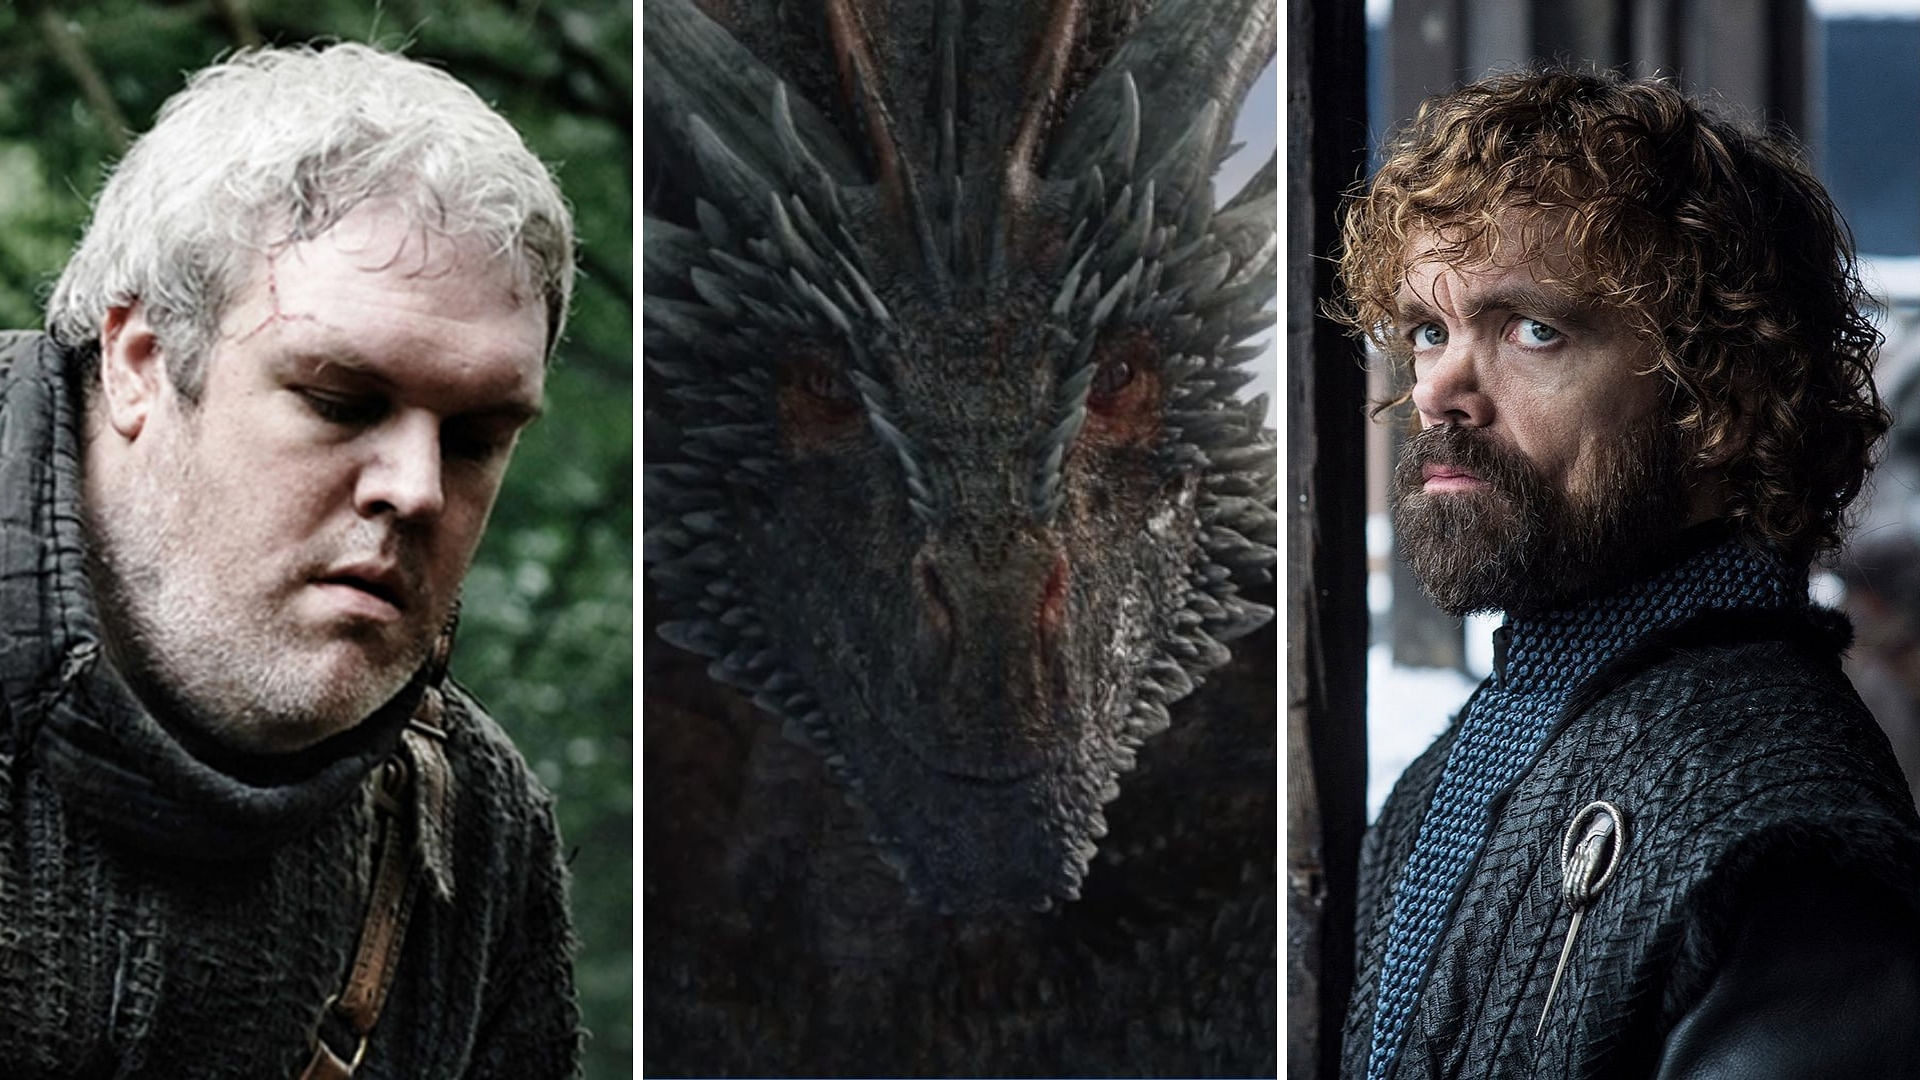 (L-R) Hodor, Drogon and Tyrion have a message for you, according to the PIB.